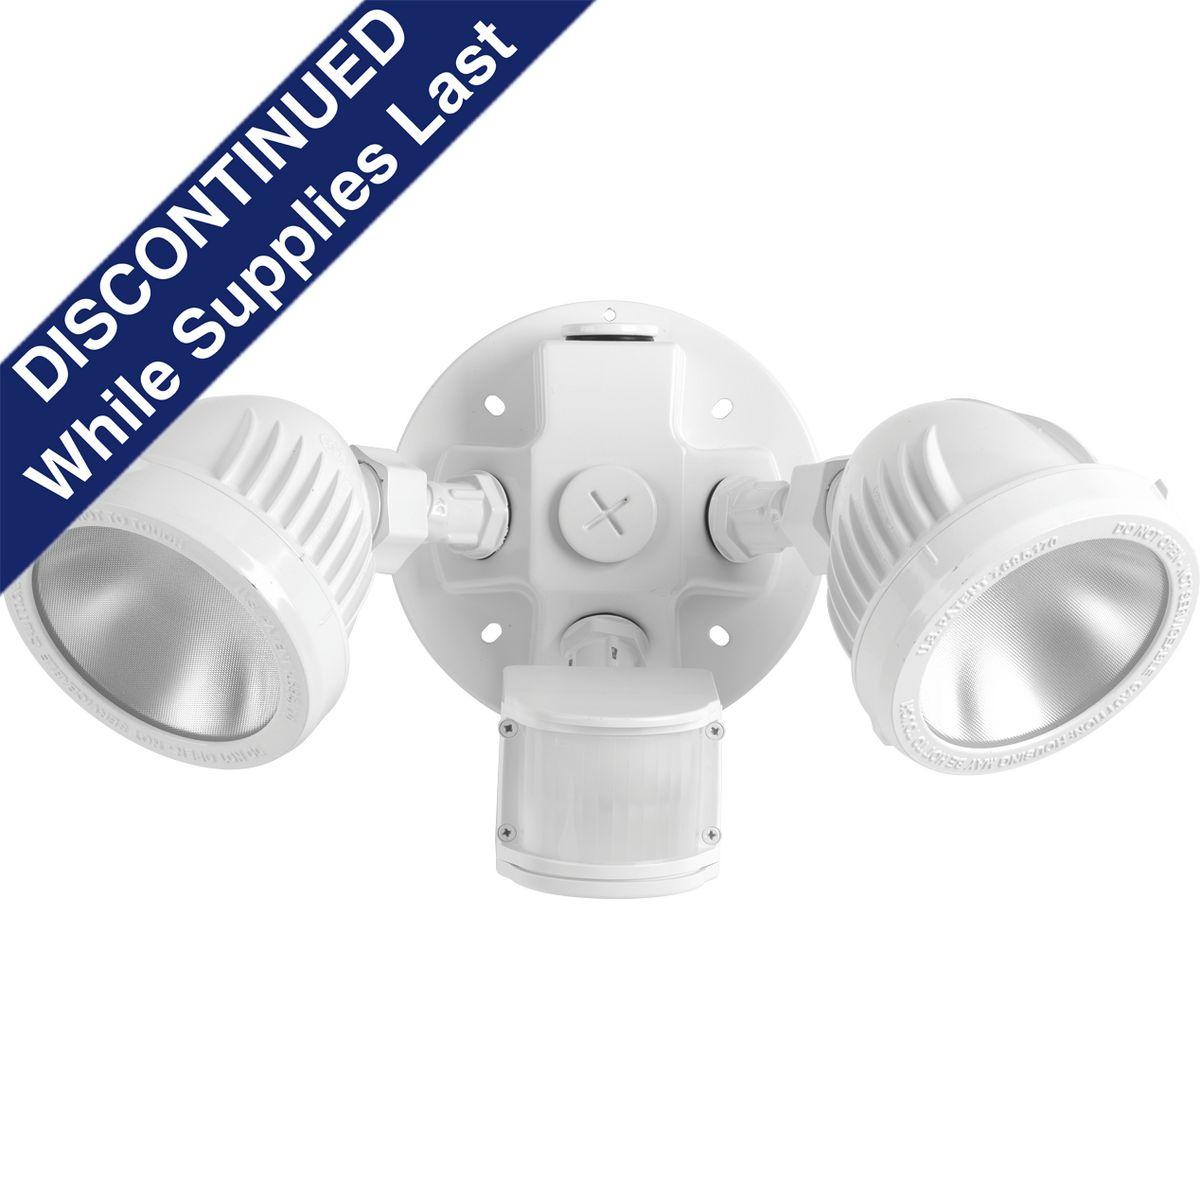 Hubbell P6341-28-30K The two-light Security light with motion sensor is ideal for residential and commercial applications. Each tempered glass head has over 1,000 lumens and is adjustable. The motion sensor has 180 degree coverage, center focus range to 72 feet, Time On, Sens